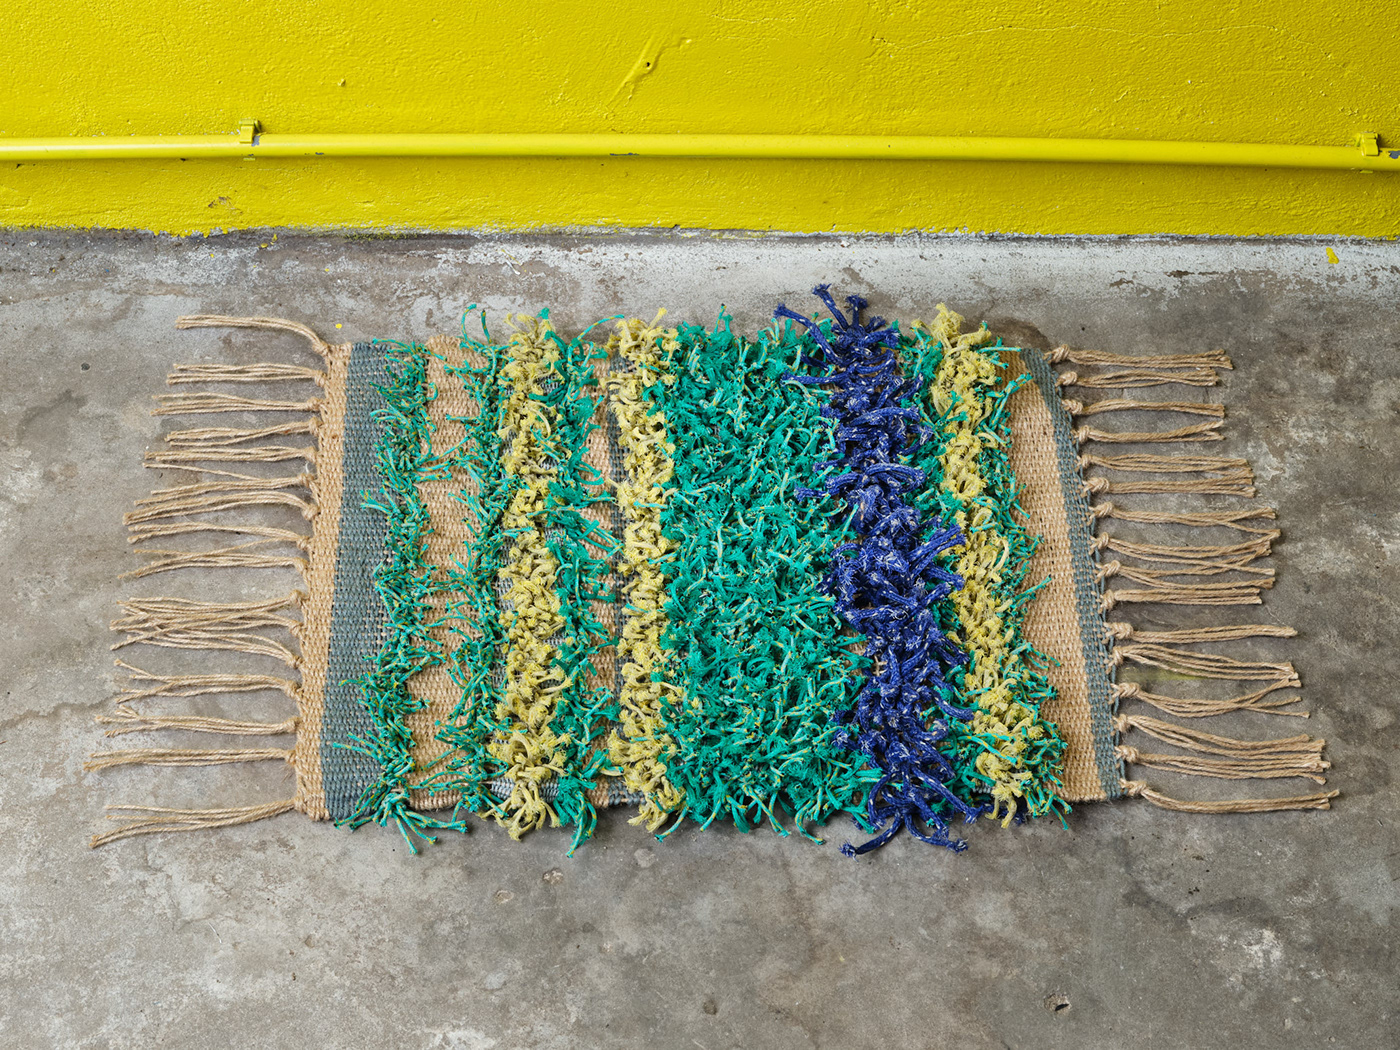 Sustainability recycled materials social design Hand weaving fishing net Collaborative project doormat design